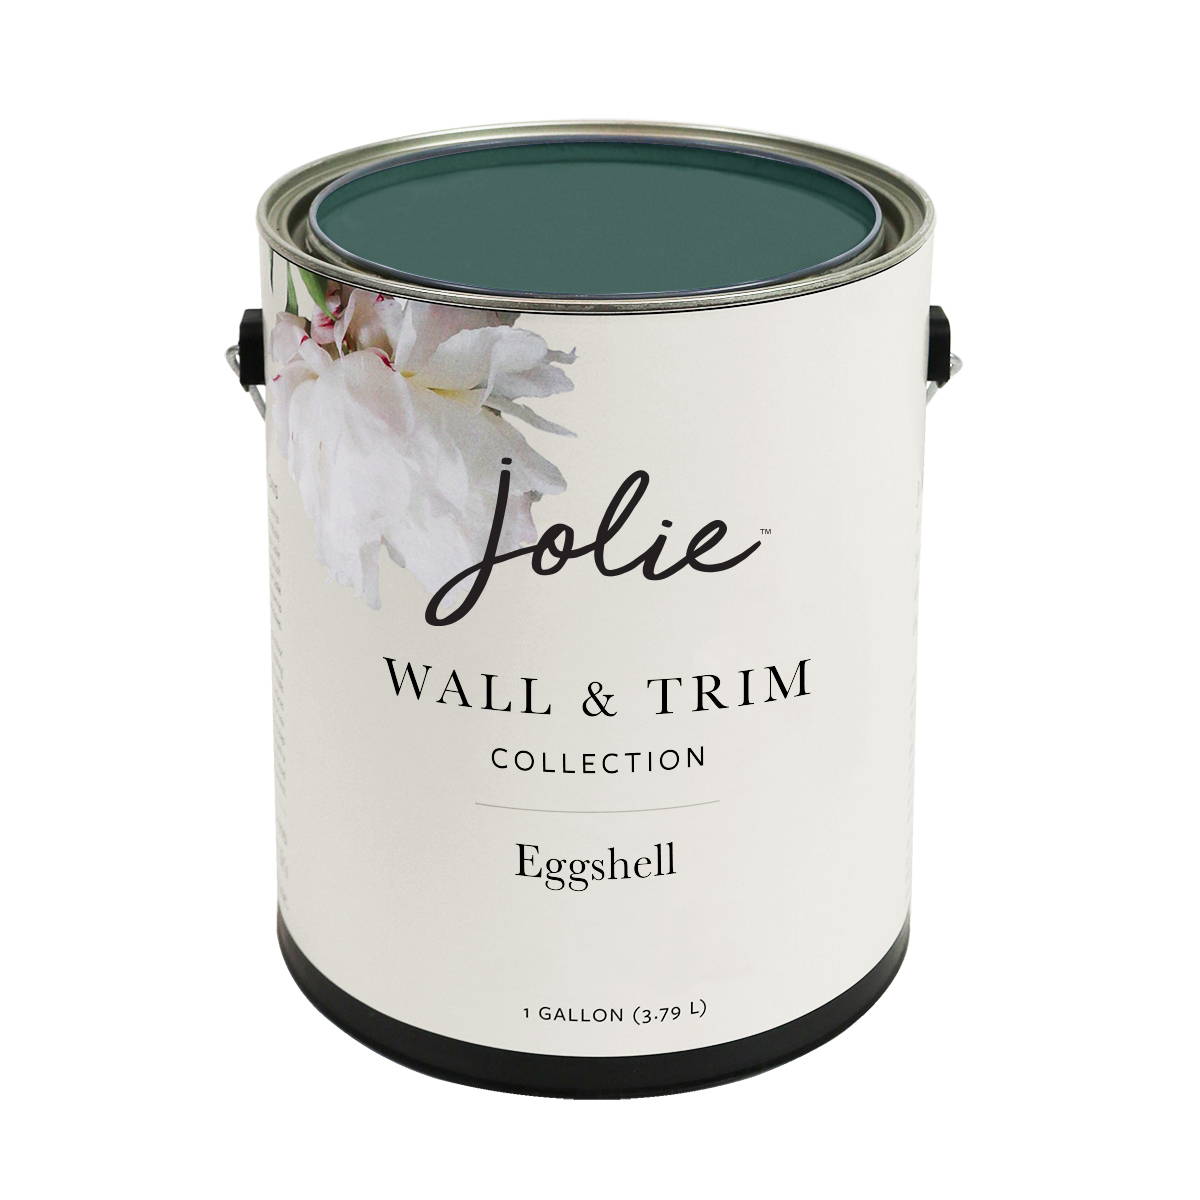 Jolie Paint - Matte Finish Paint for Furniture, Cabinets, Floors, Walls, Home Decor and Accessories - Water-Based, Non-Toxic - E